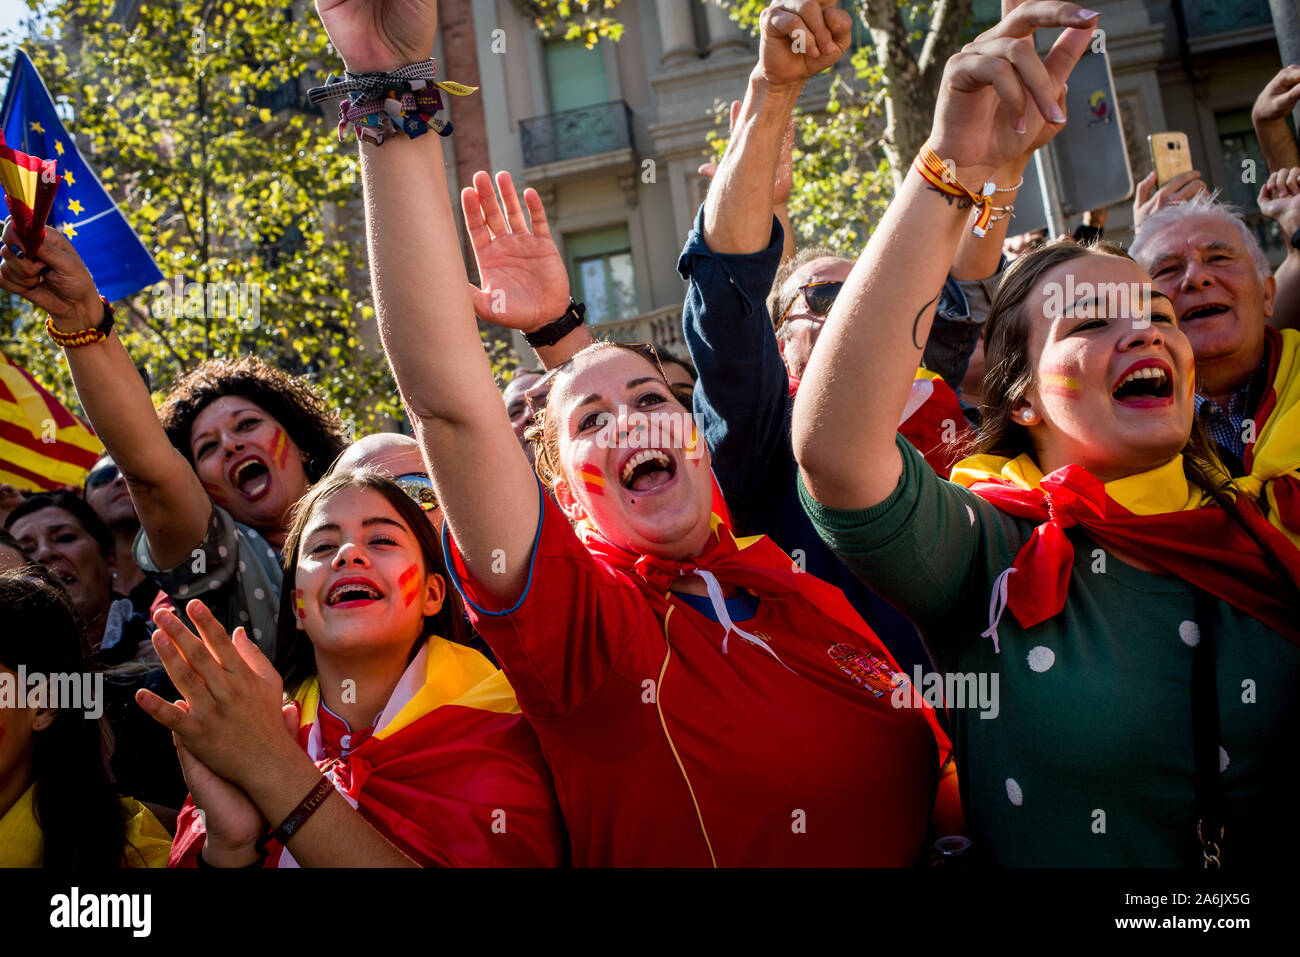 Barcelona, Spain. 27th Oct, 2019. Protesters shout slogans during a unionist march in Barcelona. Thousands pro-unionist demonstrators marched  in Barcelona against Catalan independence during a protest called by Societat Civil Catalana organization. Credit:  Jordi Boixareu/Alamy Live News Stock Photo